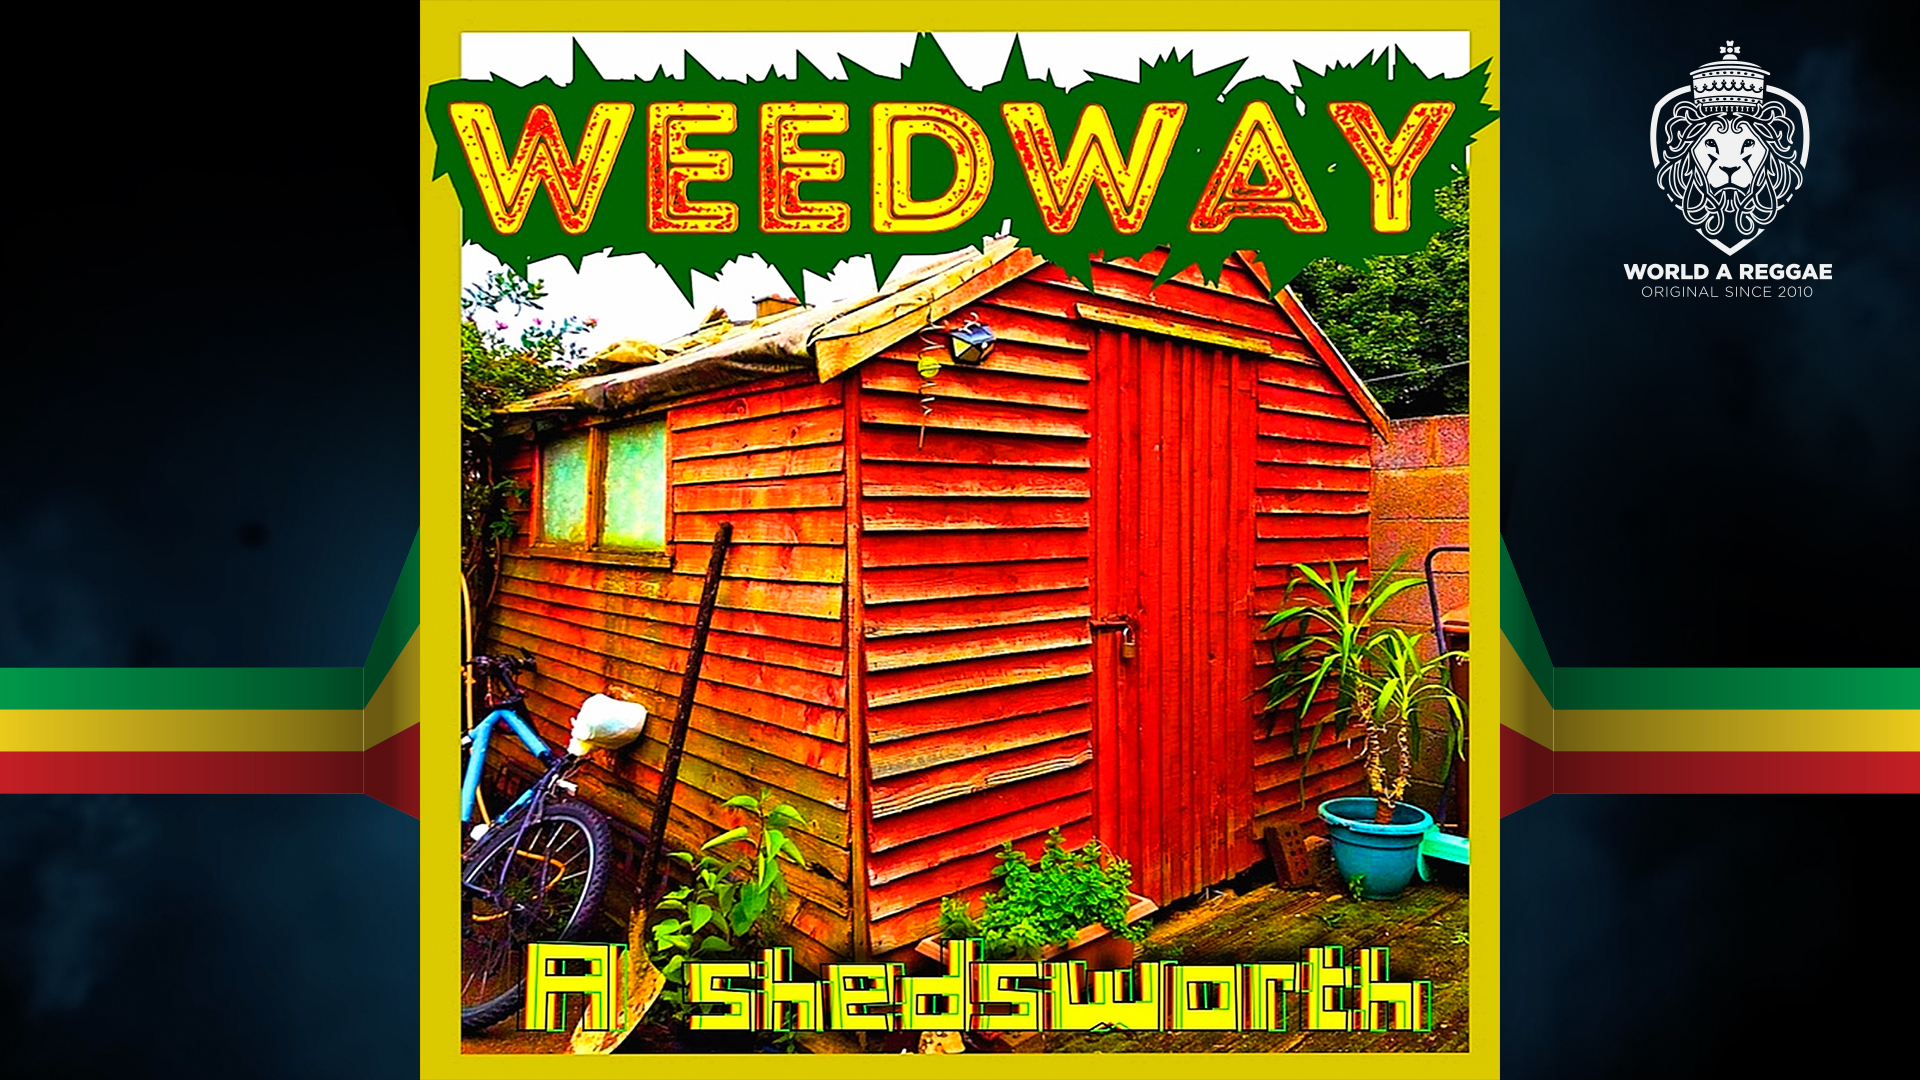 ‘A Shedsworth’: the debut album by WeedWay